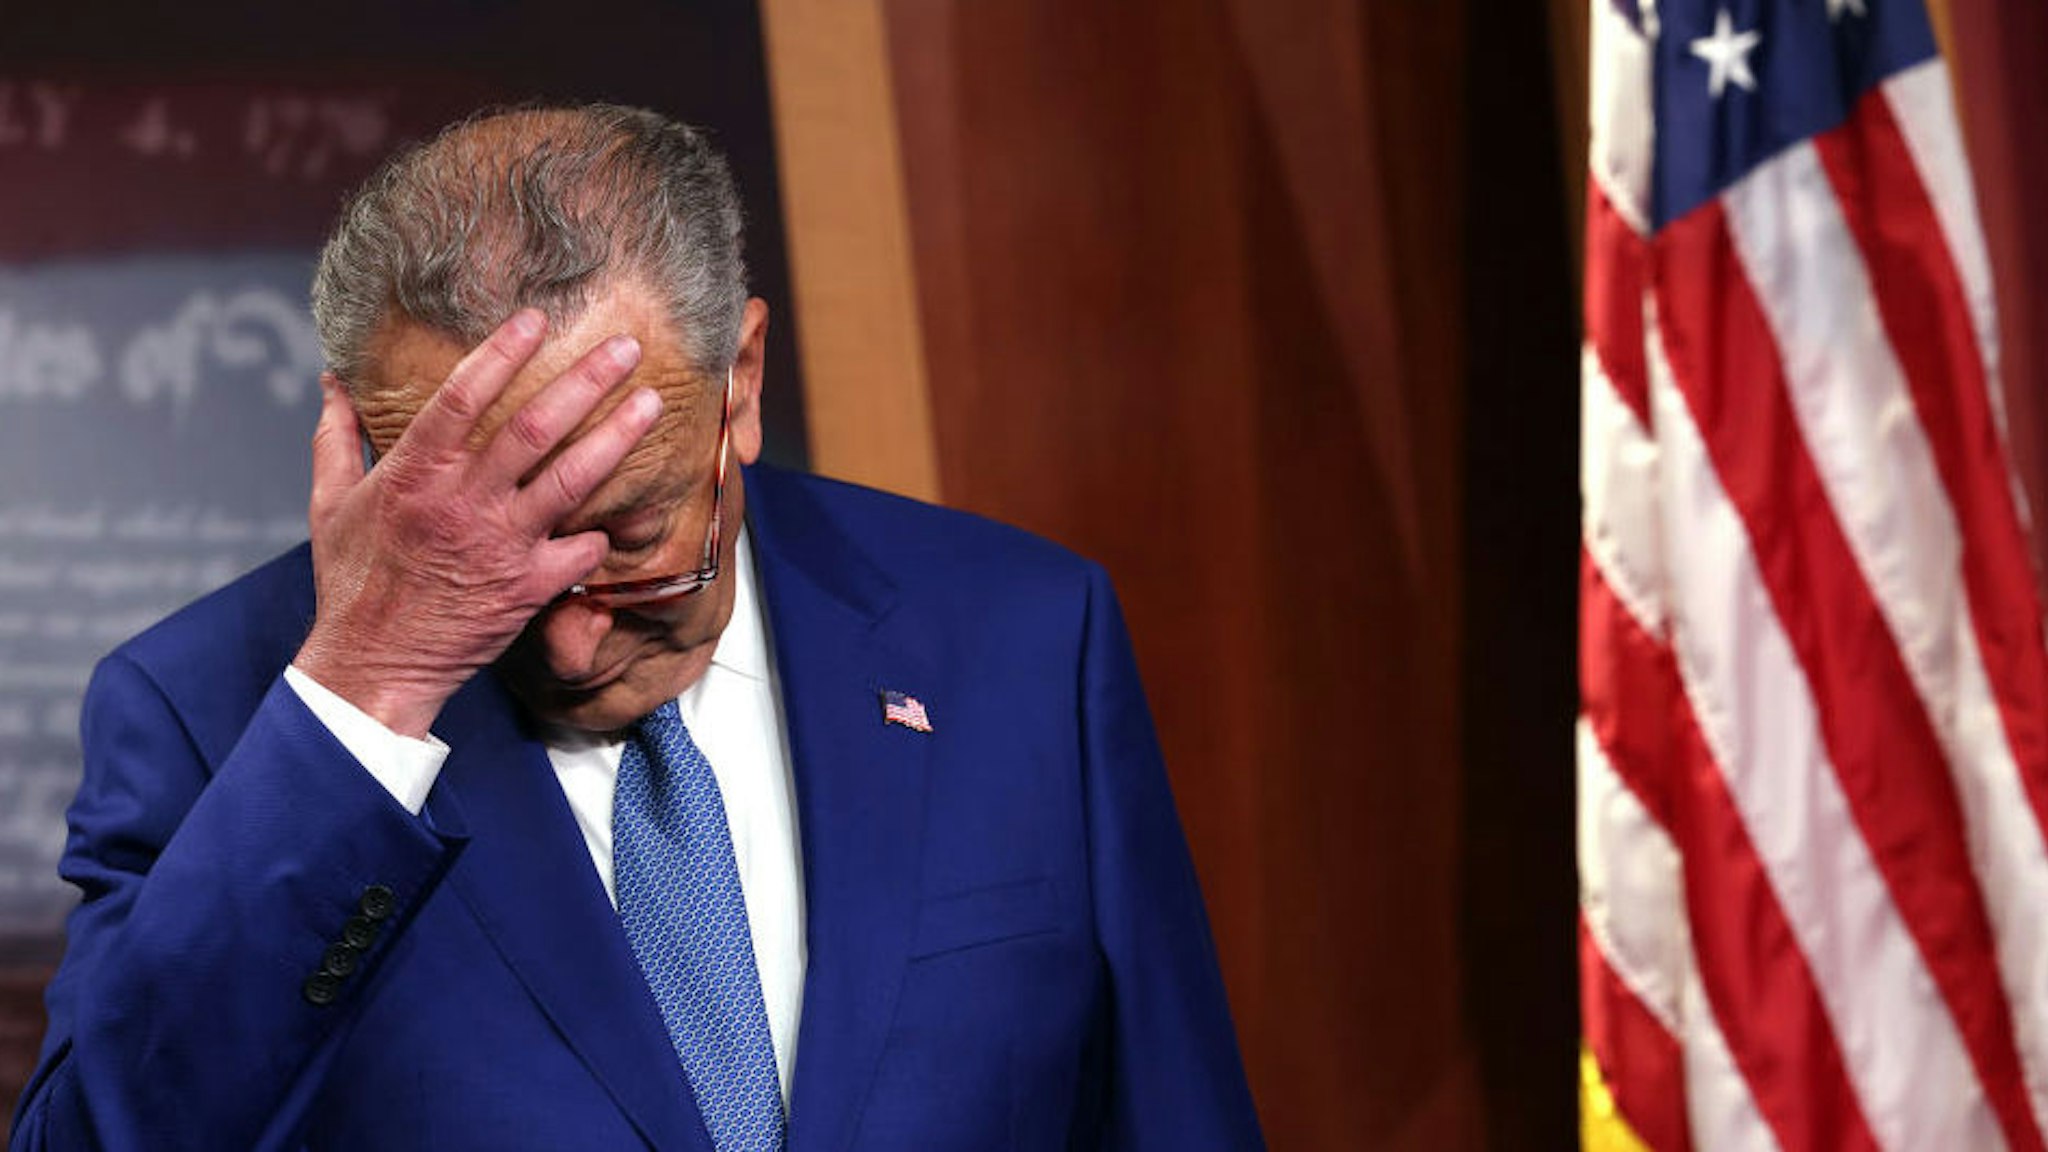 WASHINGTON, DC - JULY 14: U.S. Senate Majority Leader Charles Schumer (D-NY) scratches his head as he attends a press conference on introducing legislation to end federal cannabis prohibition at the U.S. Capitol on July 14, 2021 in Washington, DC. The Senate Democratic leader is introducing The Cannabis Administration And Opportunity Act, which will remove marijuana from the list of controlled substances and begin regulating and taxing it at the federal level.